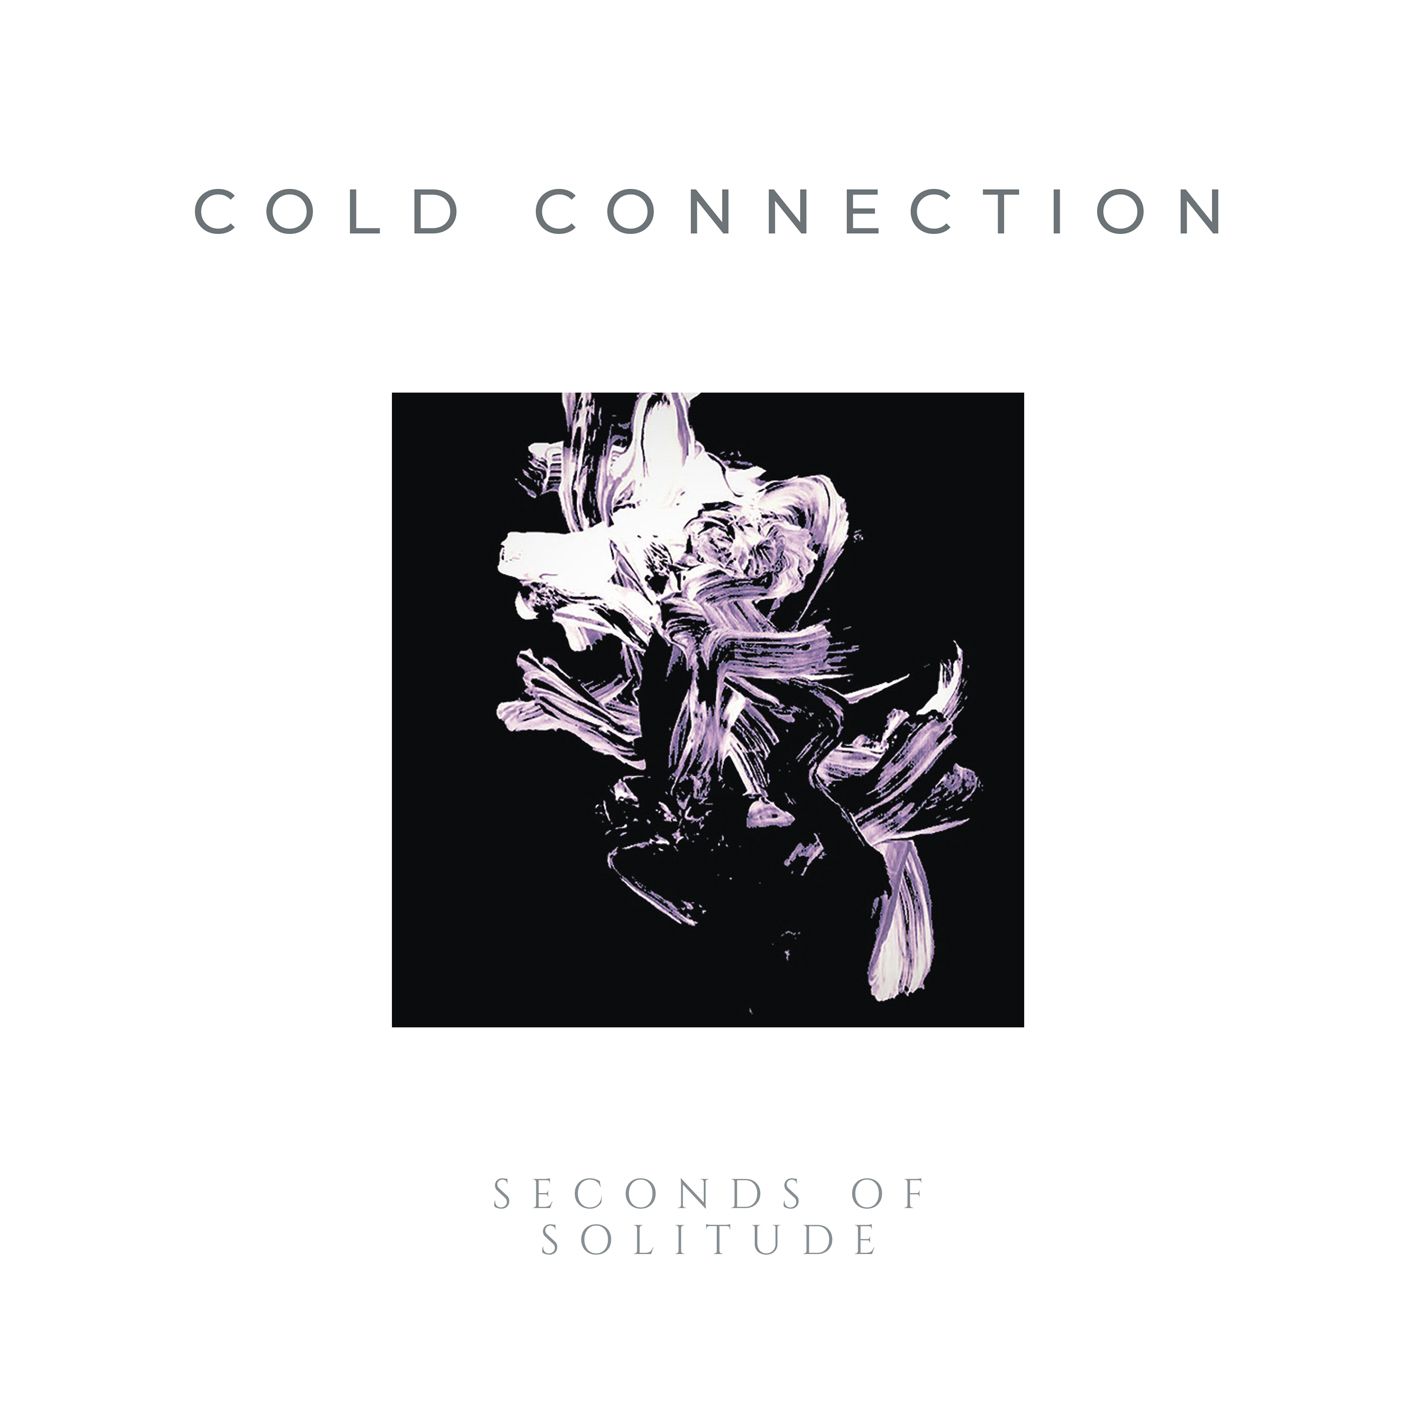 Cold Connection – “Seconds of solitude”